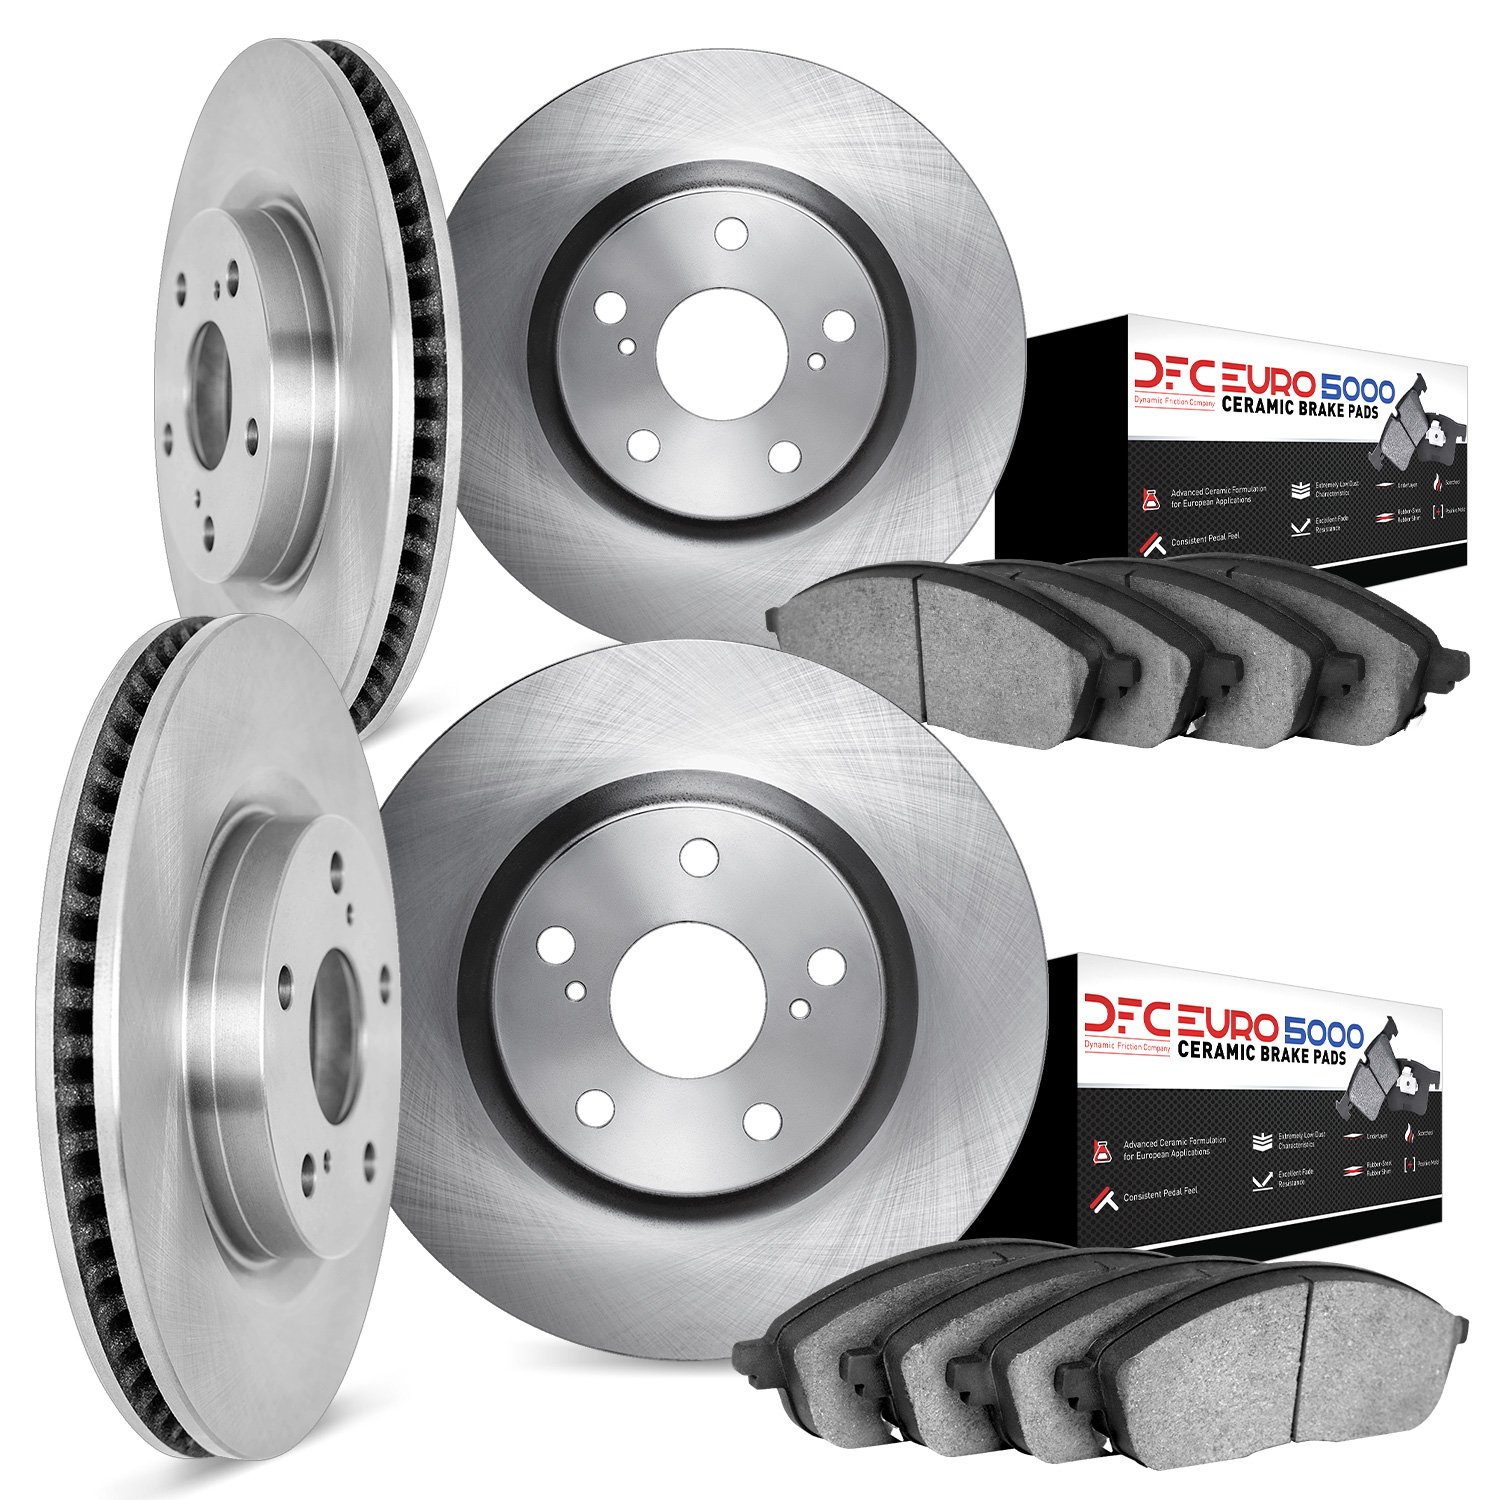 6604-11970 Brake Rotors w/5000 Euro Ceramic Brake Pads, 2010-2015 GM, Position: Front and Rear